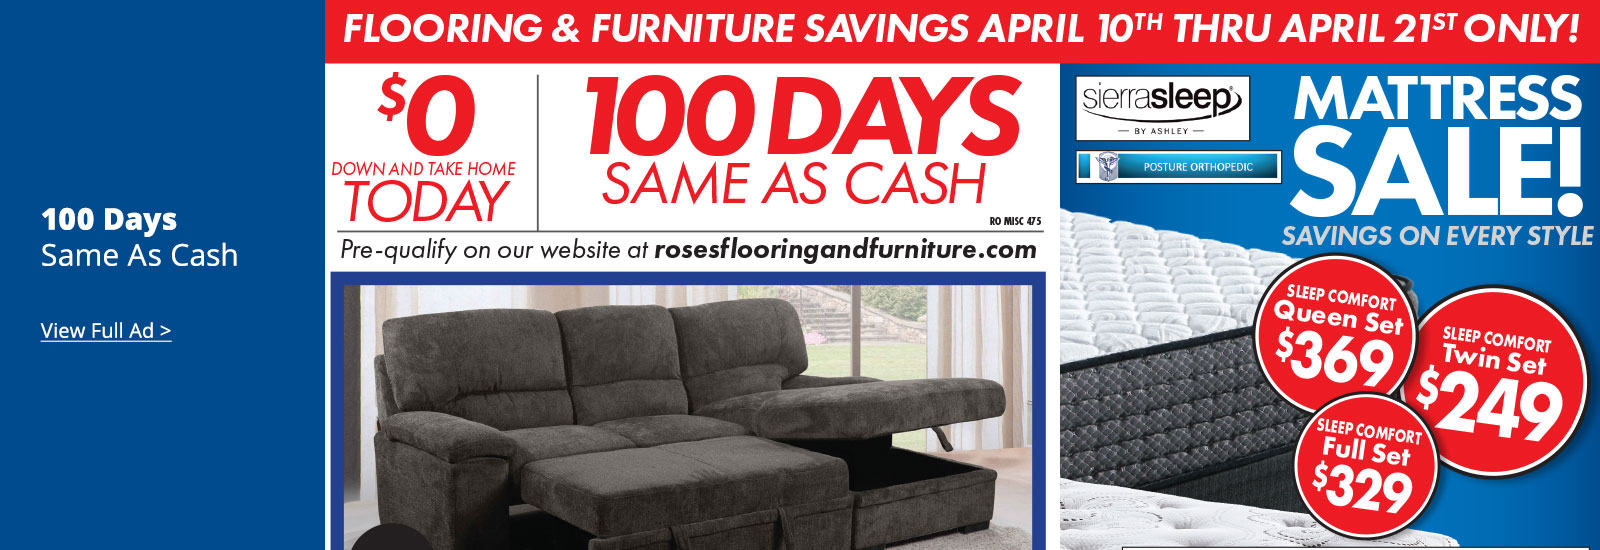 100 Days Same as Cash View Full Ad